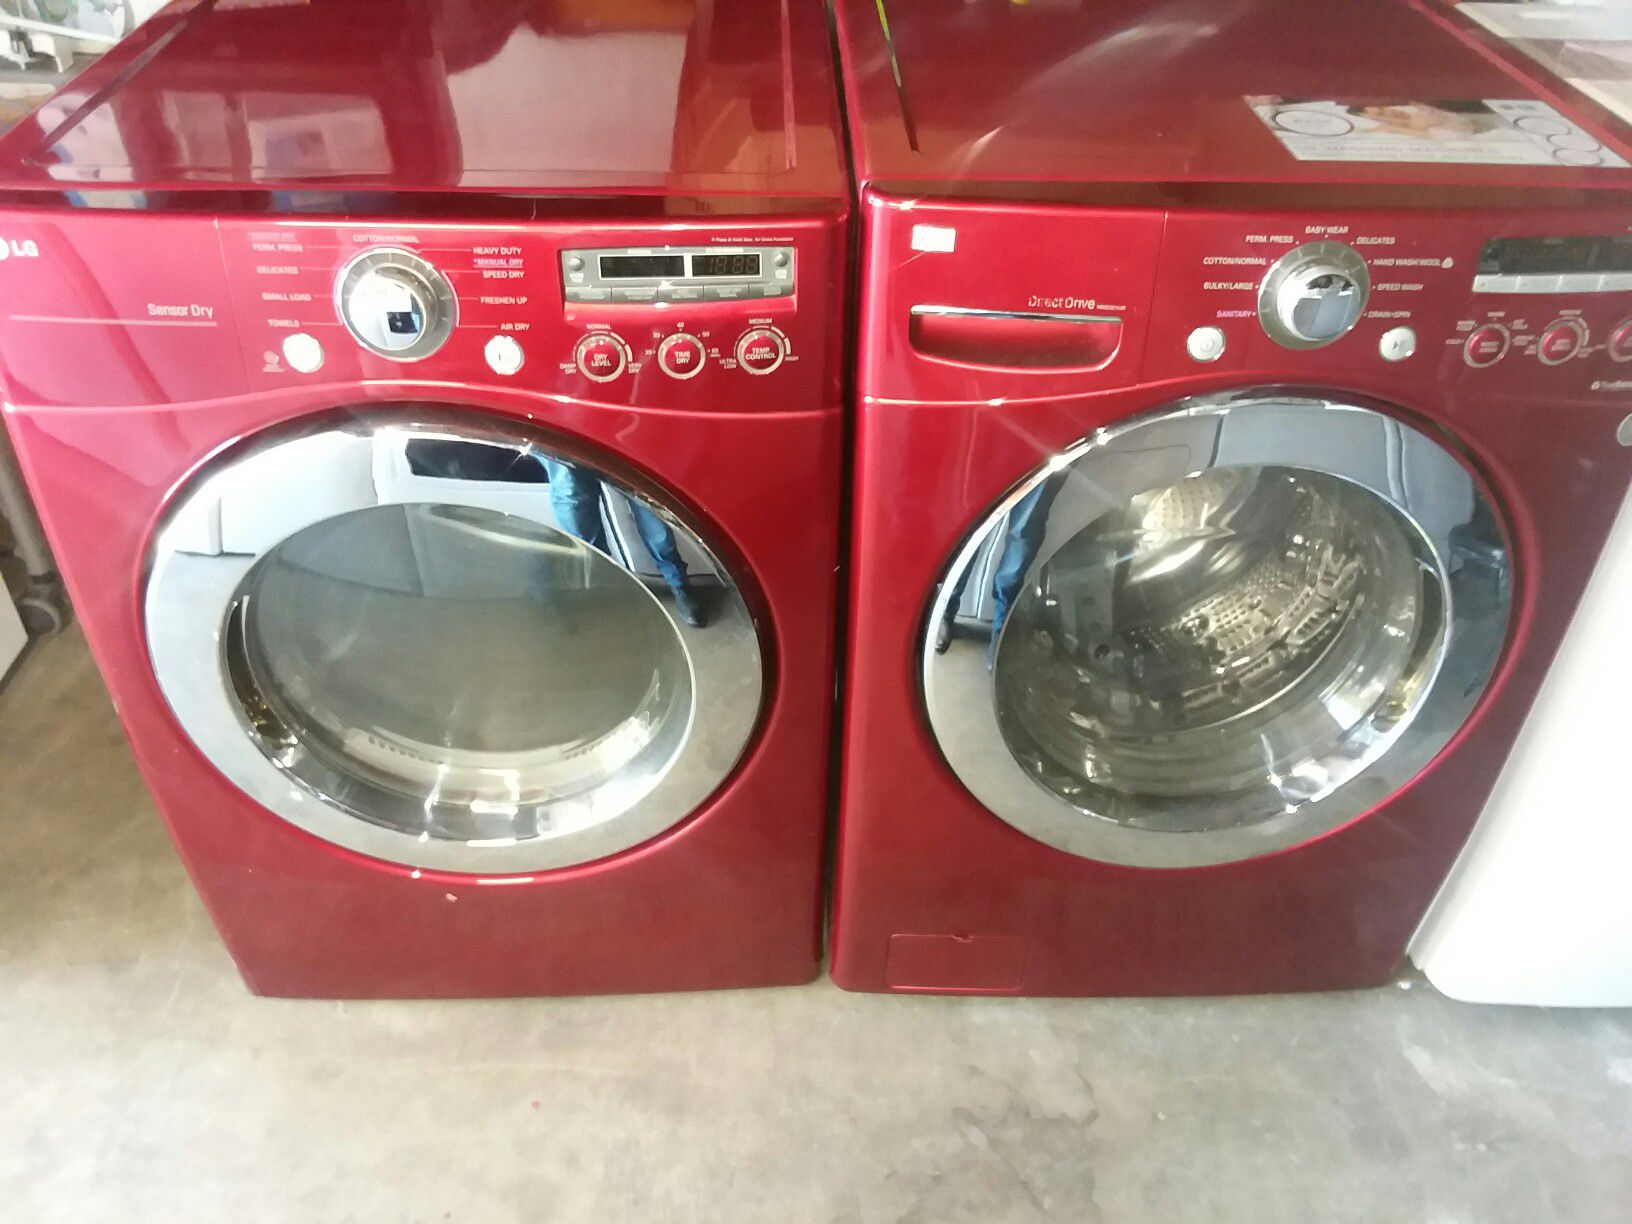 LG front load washer and Gas dryer set $700